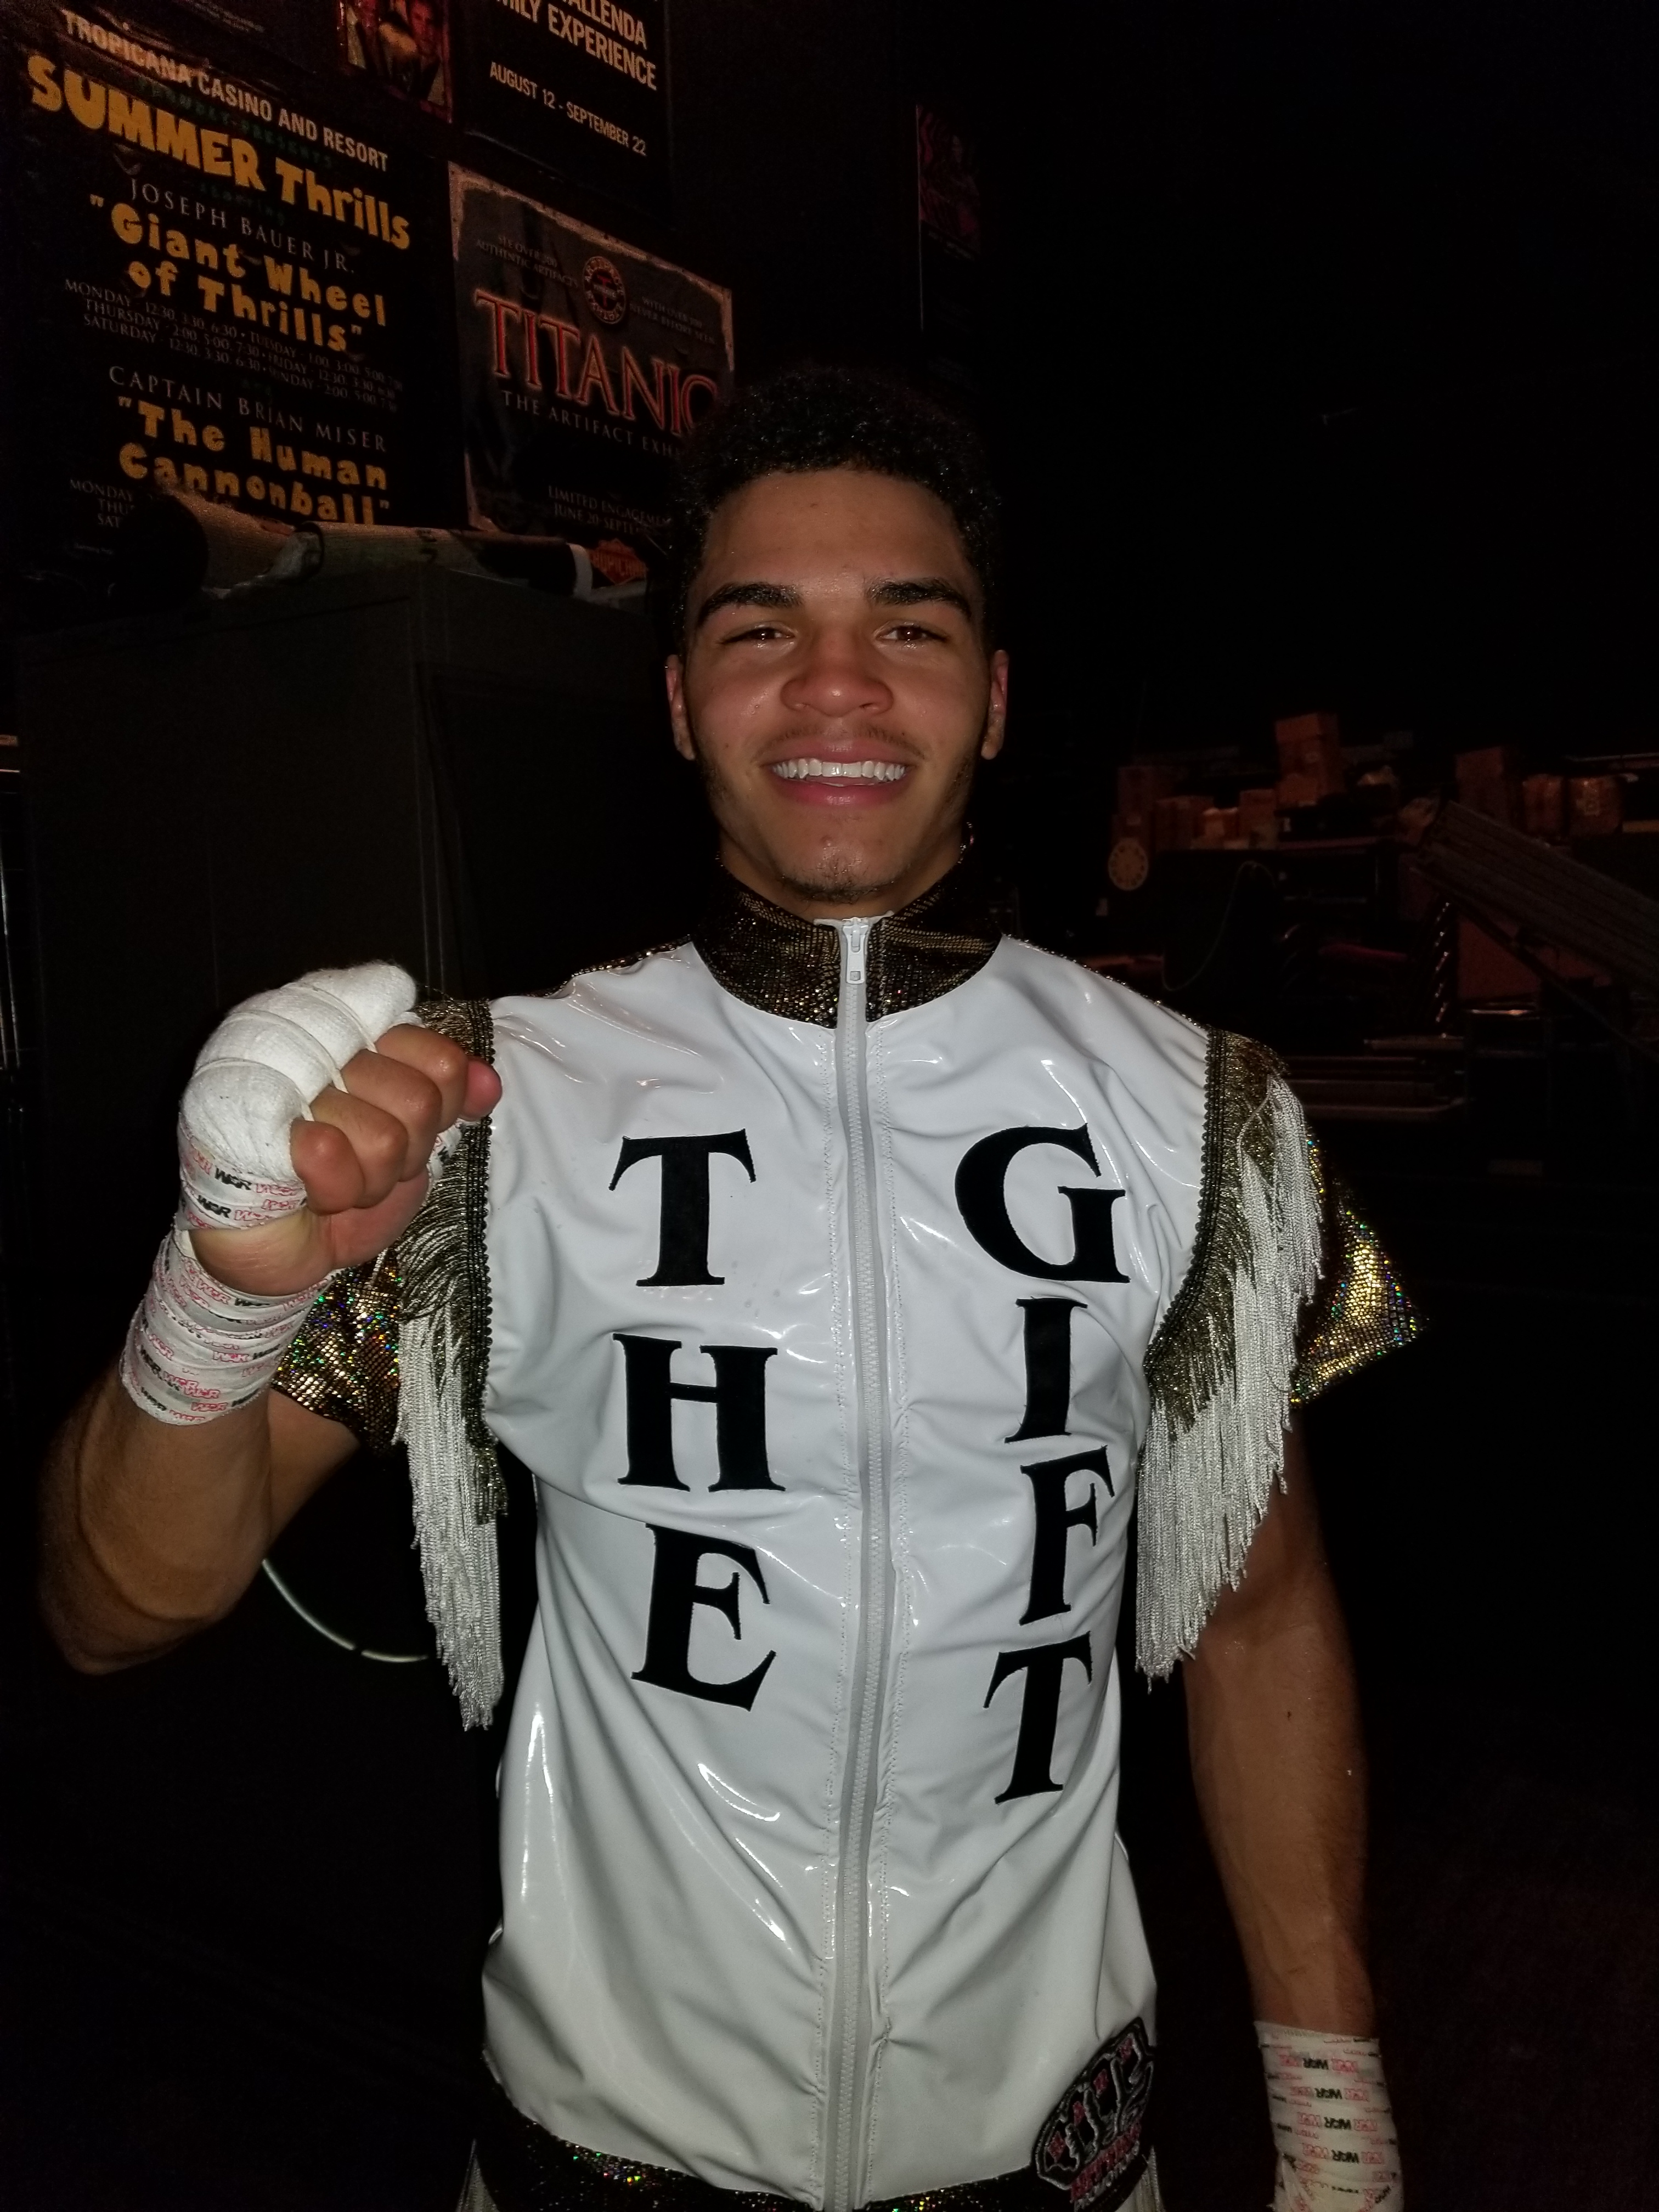 Christian Carto, Branden Pizarro Represent New Wave Of Philly Fighters – CBS Philly